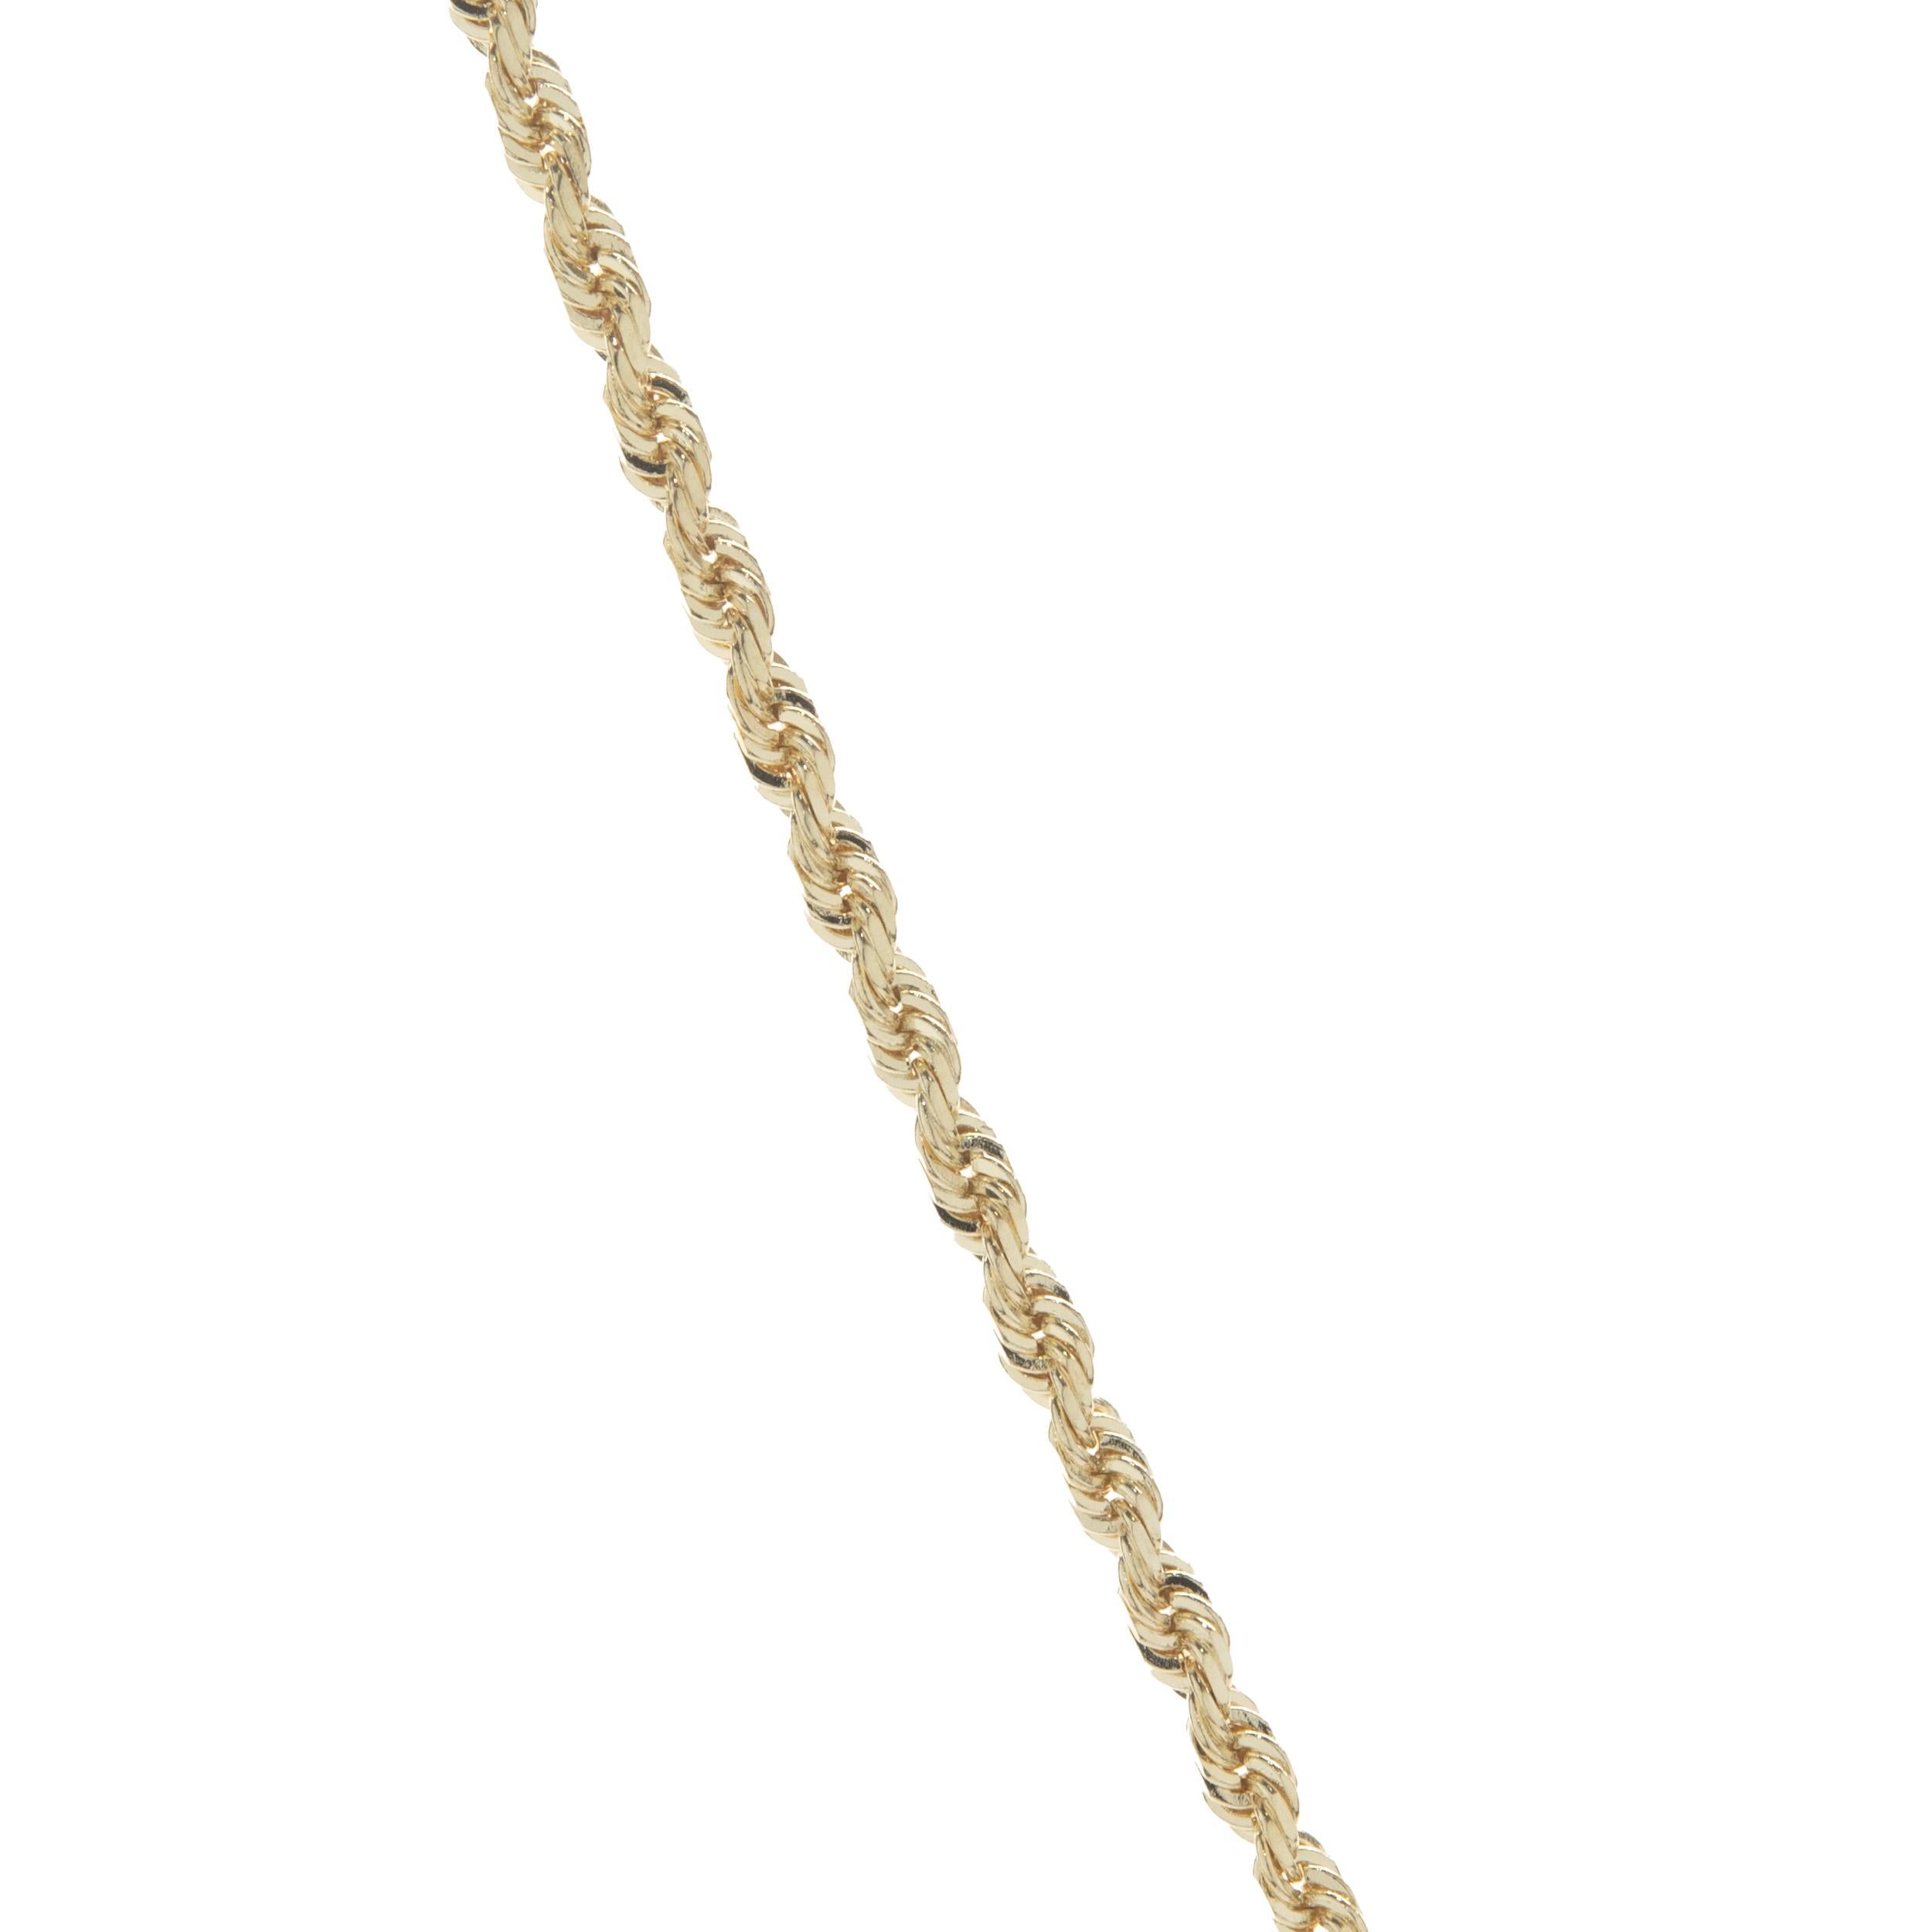 Designer: custom
Material: 14K yellow gold
Dimensions: necklace measures 18-inches in length
Weight: 6.5 grams